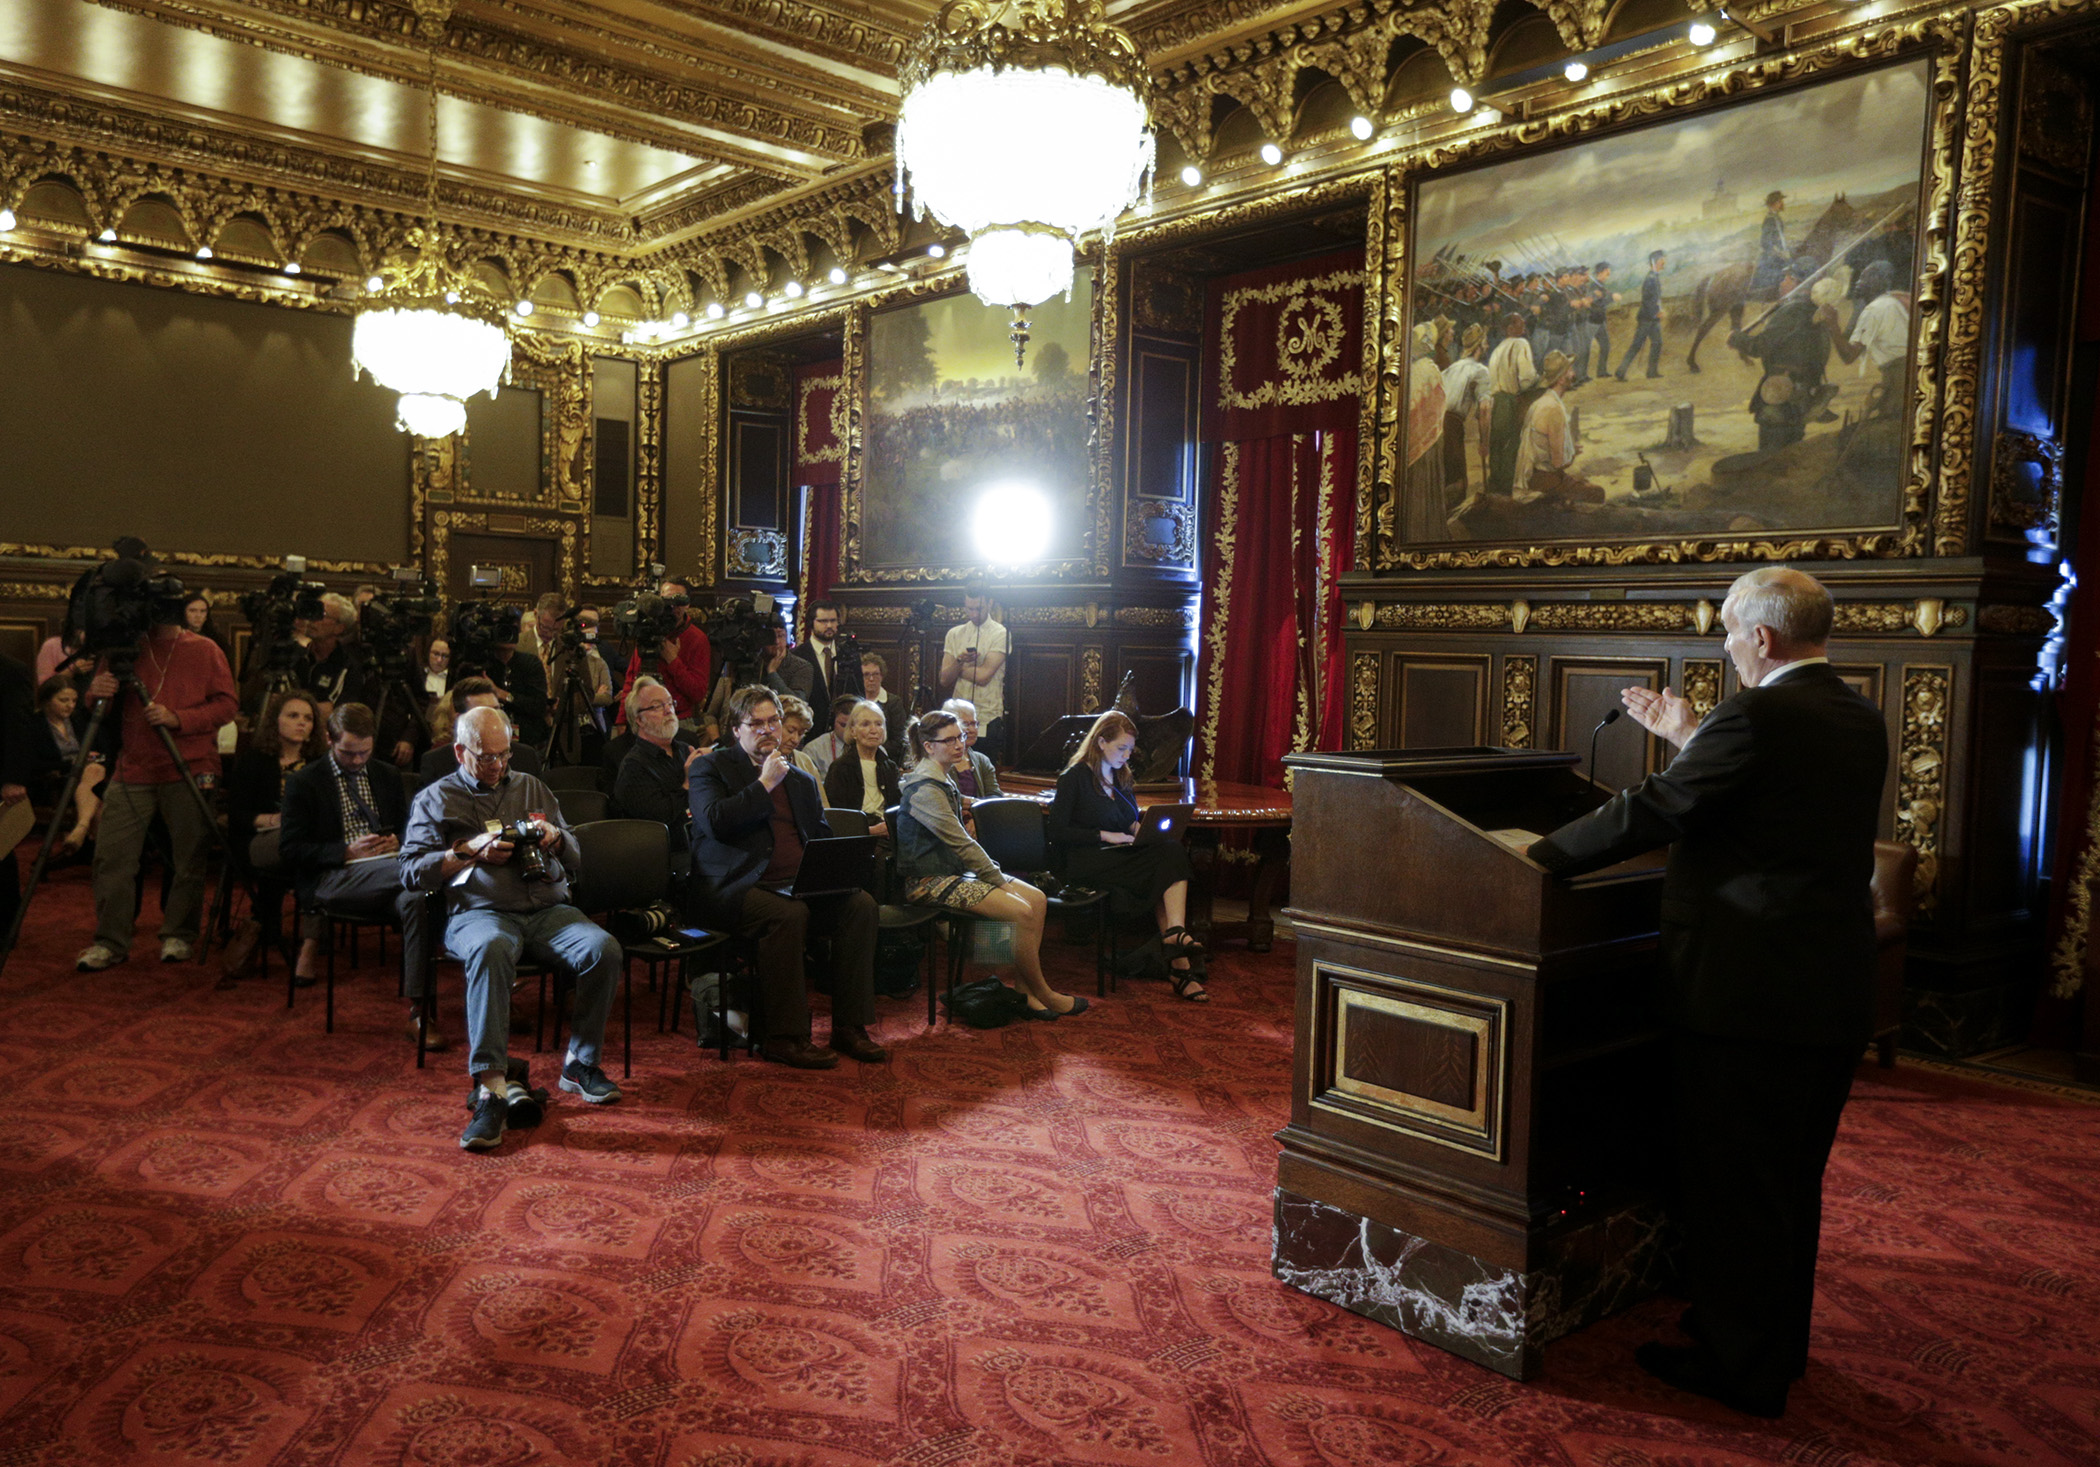 Gov. Mark Dayton speaks about the end of session process at a May 11 news conference. Photo by Paul Battaglia